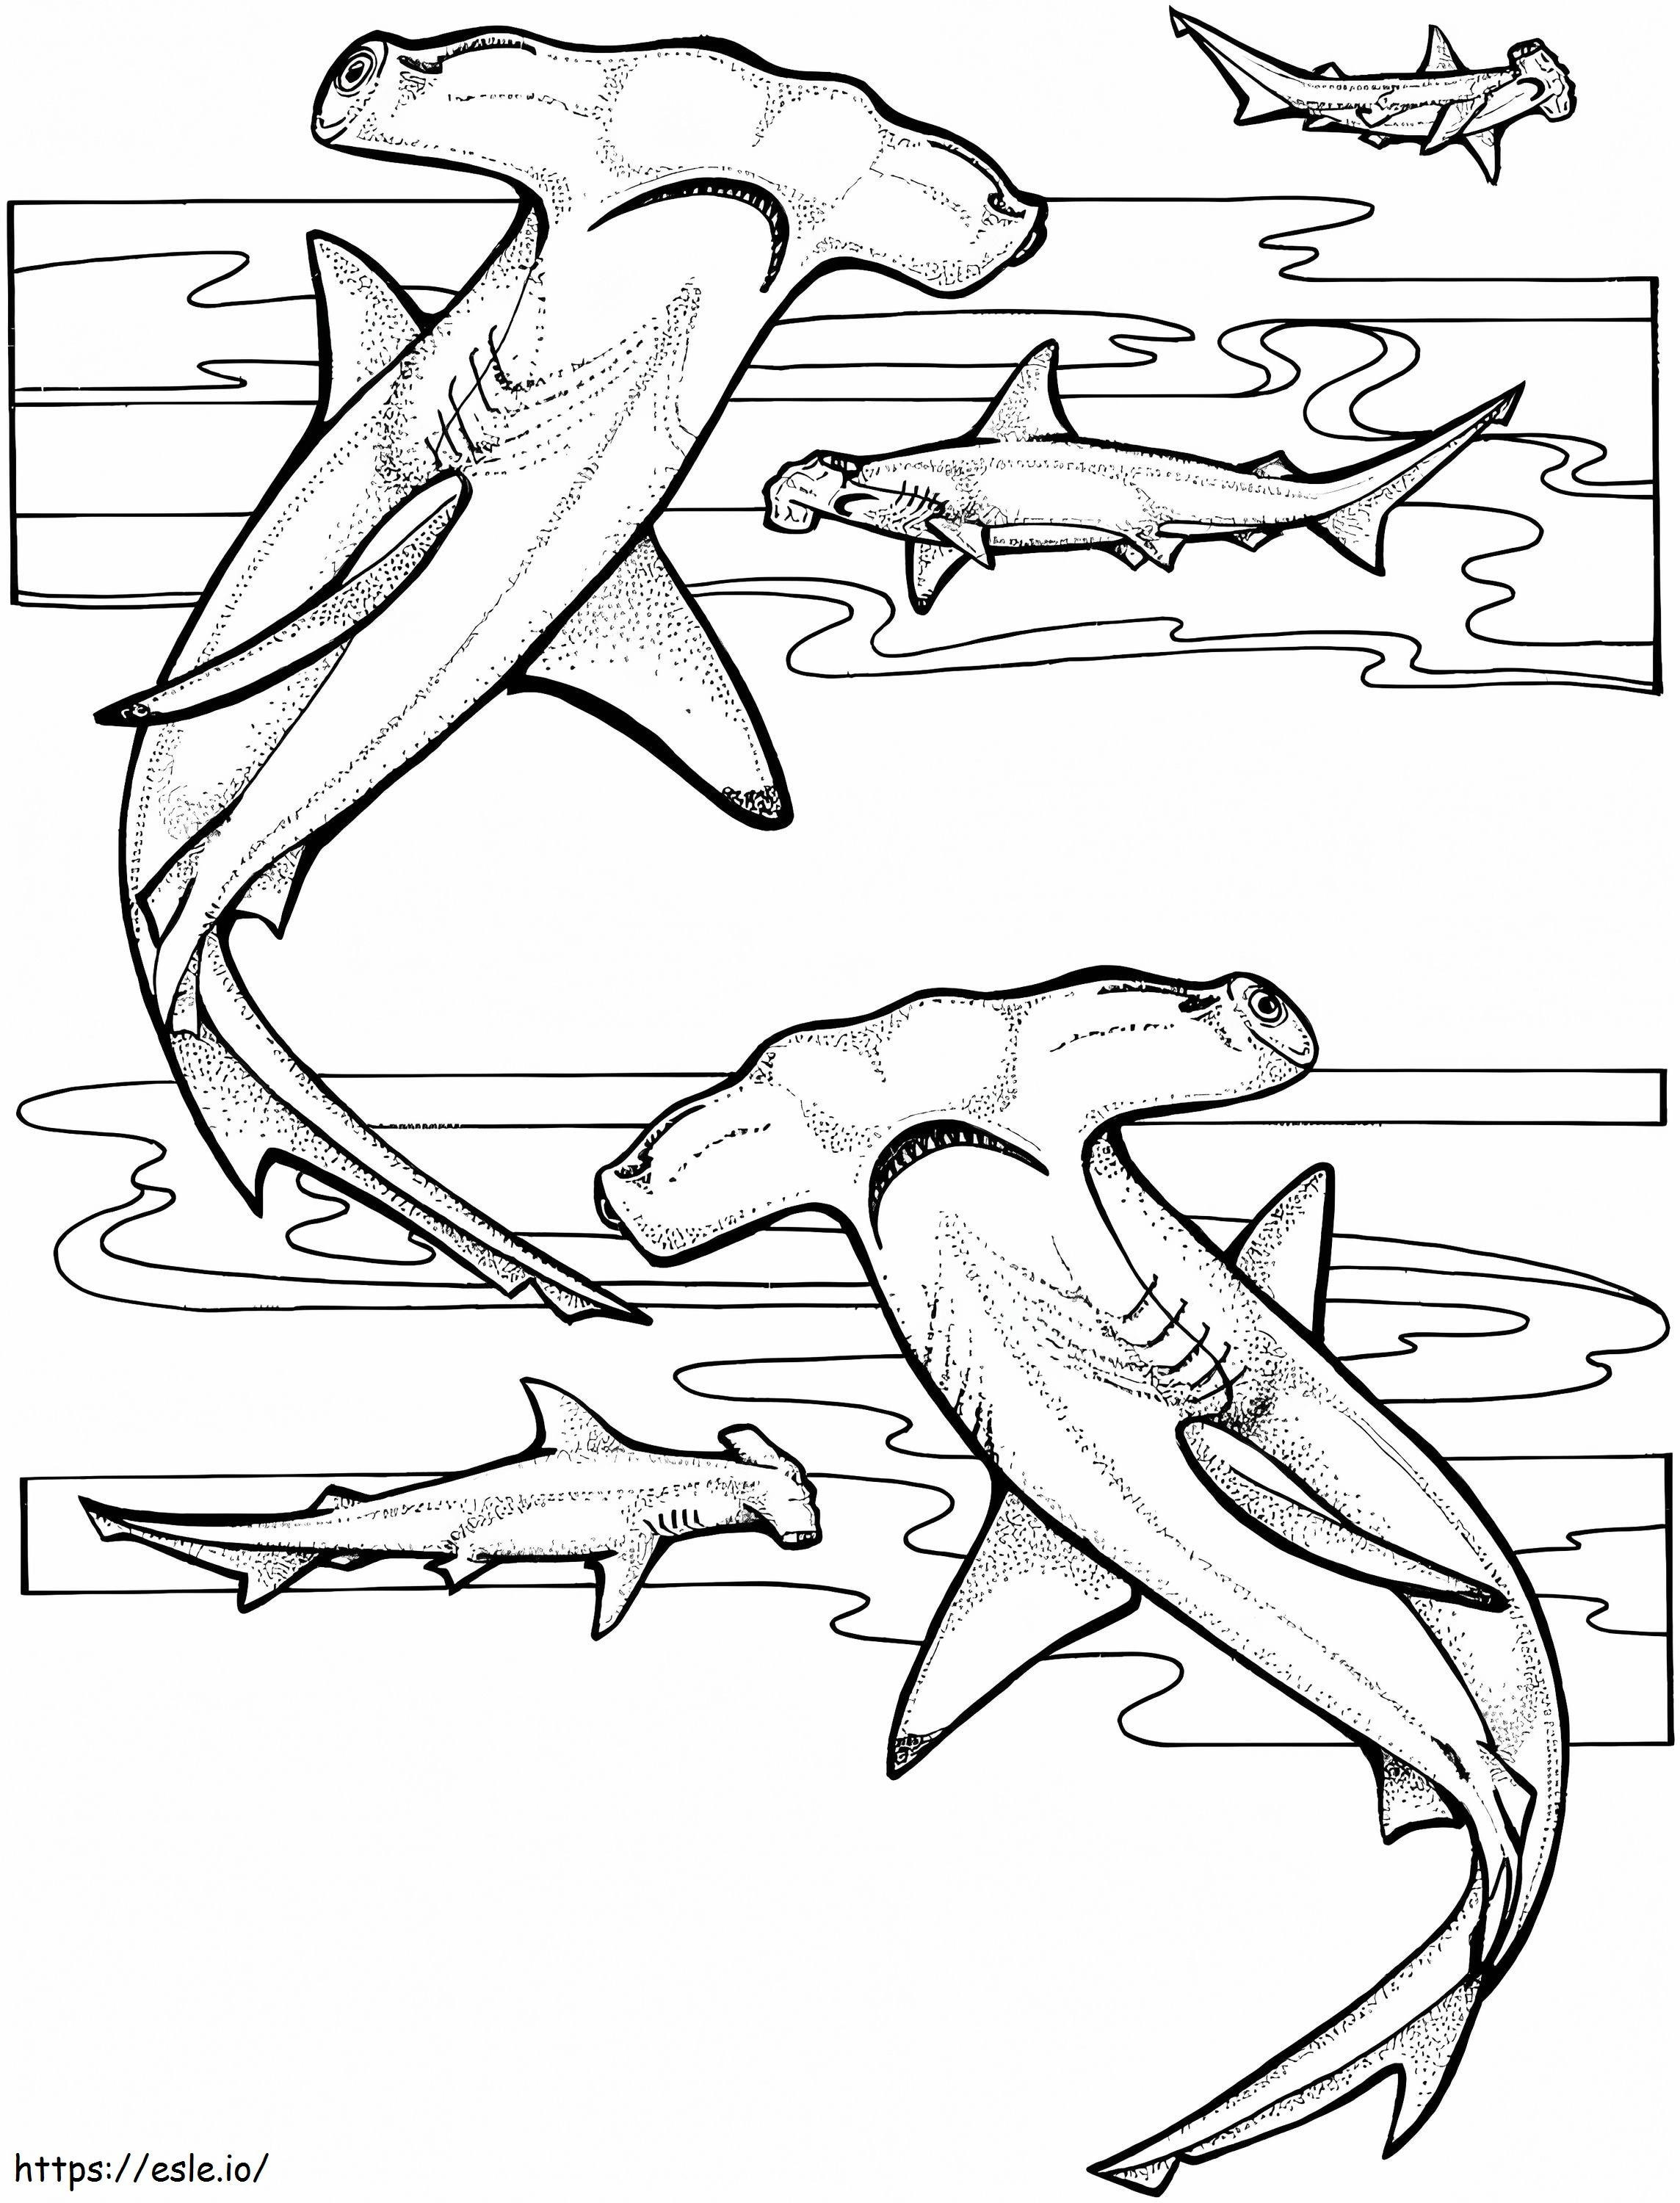 Hammerhead Sharks coloring page